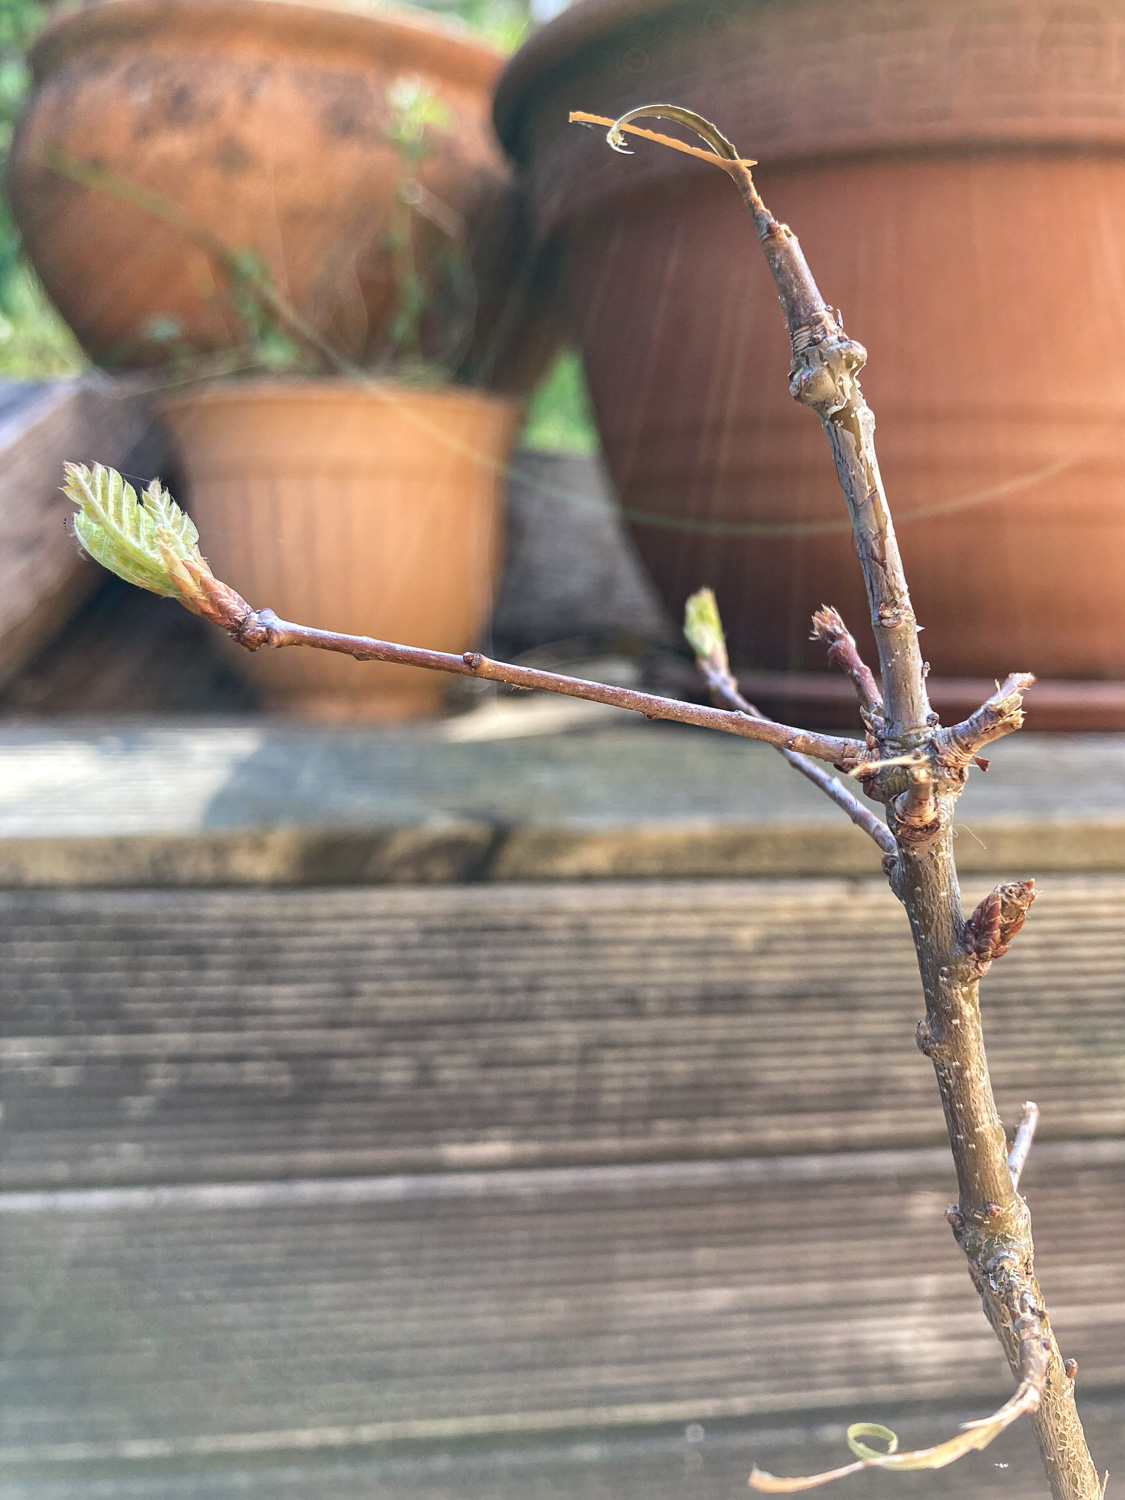 A small oak sapling in a pot that has had most of its buds eaten